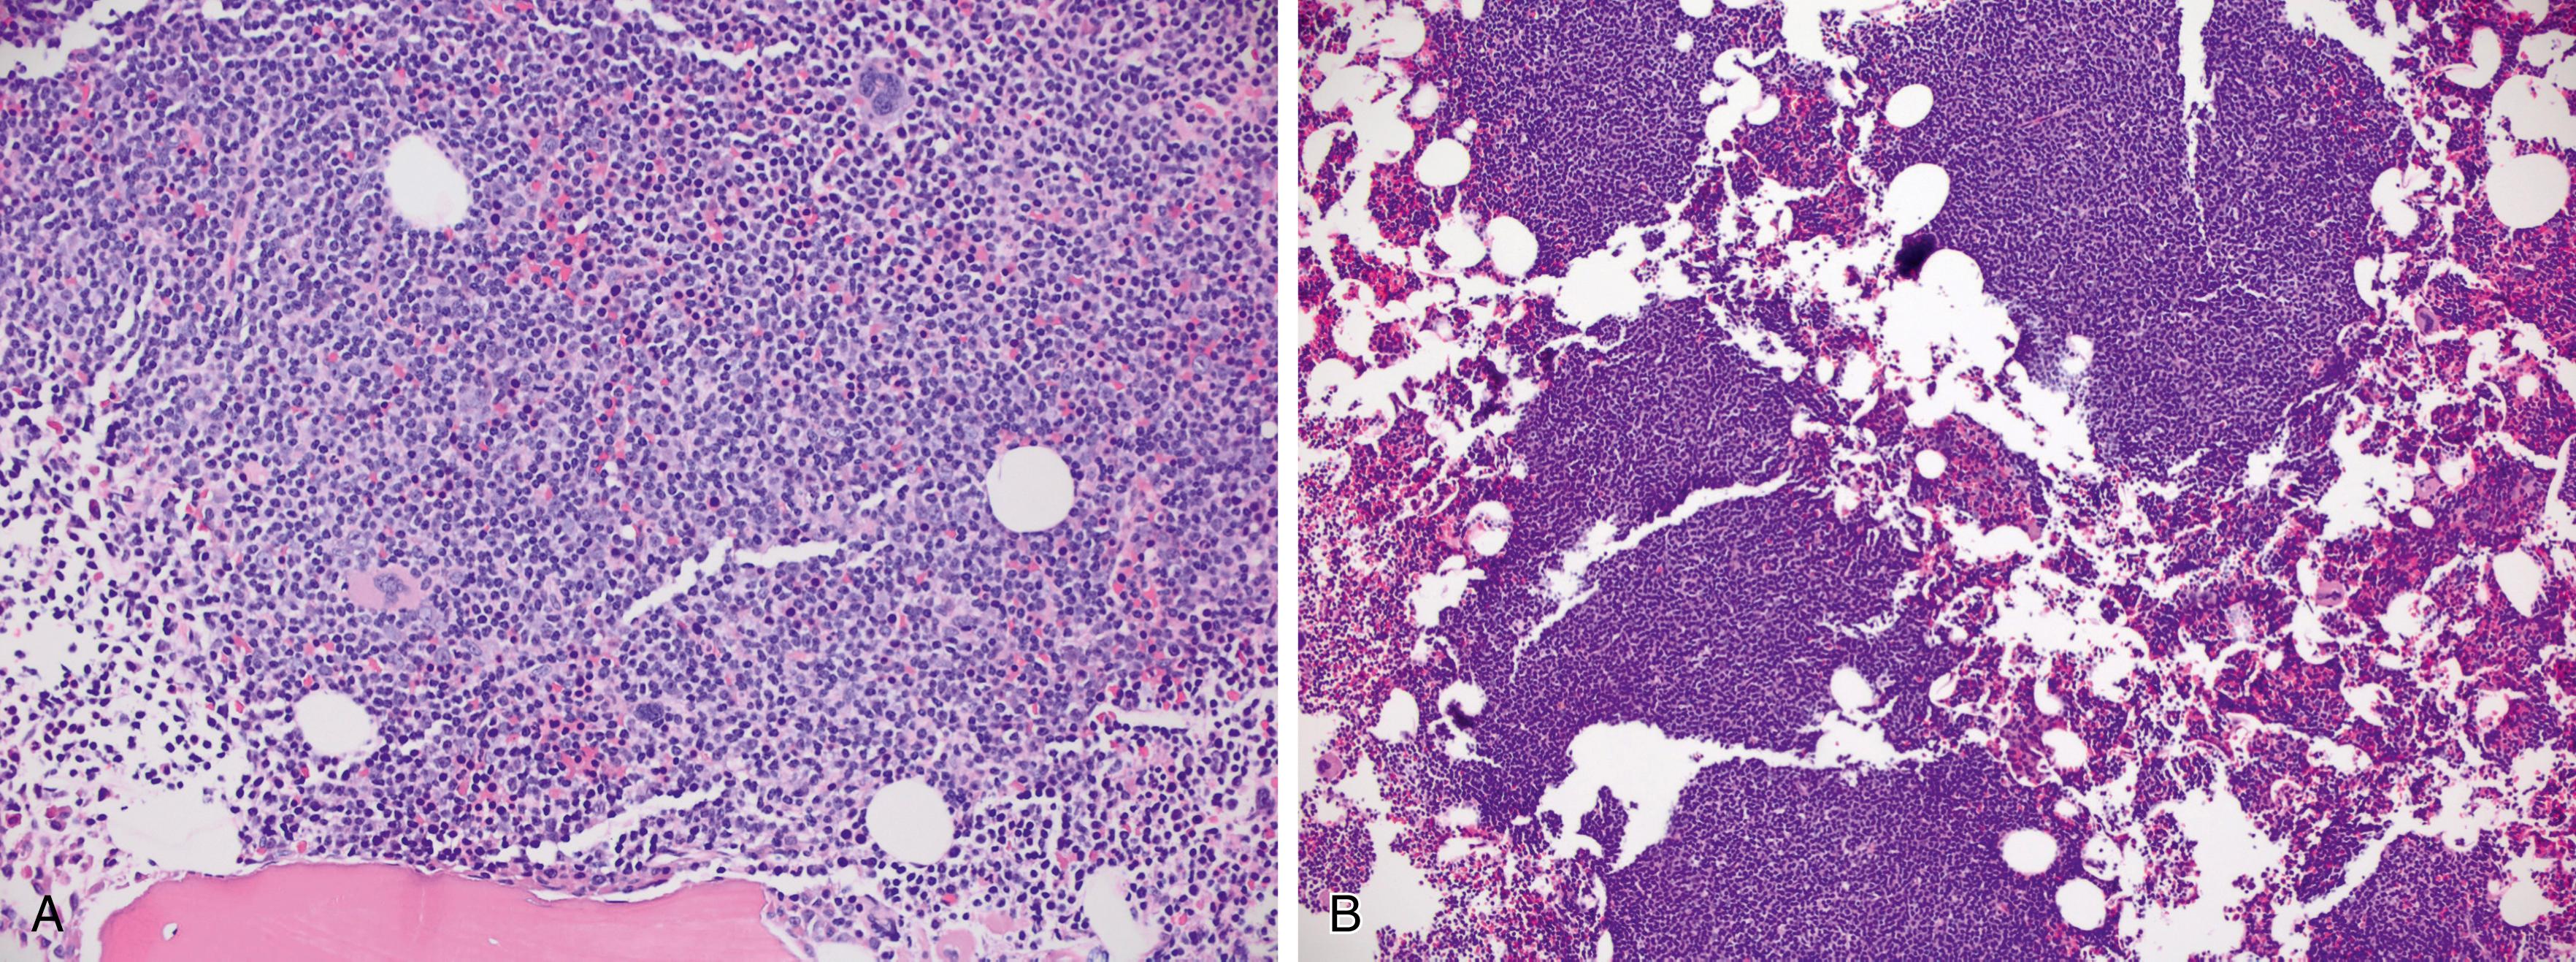 Fig. 10.10, Chronic lymphocytic leukemia/small lymphocytic lymphoma in bone marrow with (A) diffuse interstitial involvement by small lymphocytes, and (B) nodular involvement of the marrow interstitium.